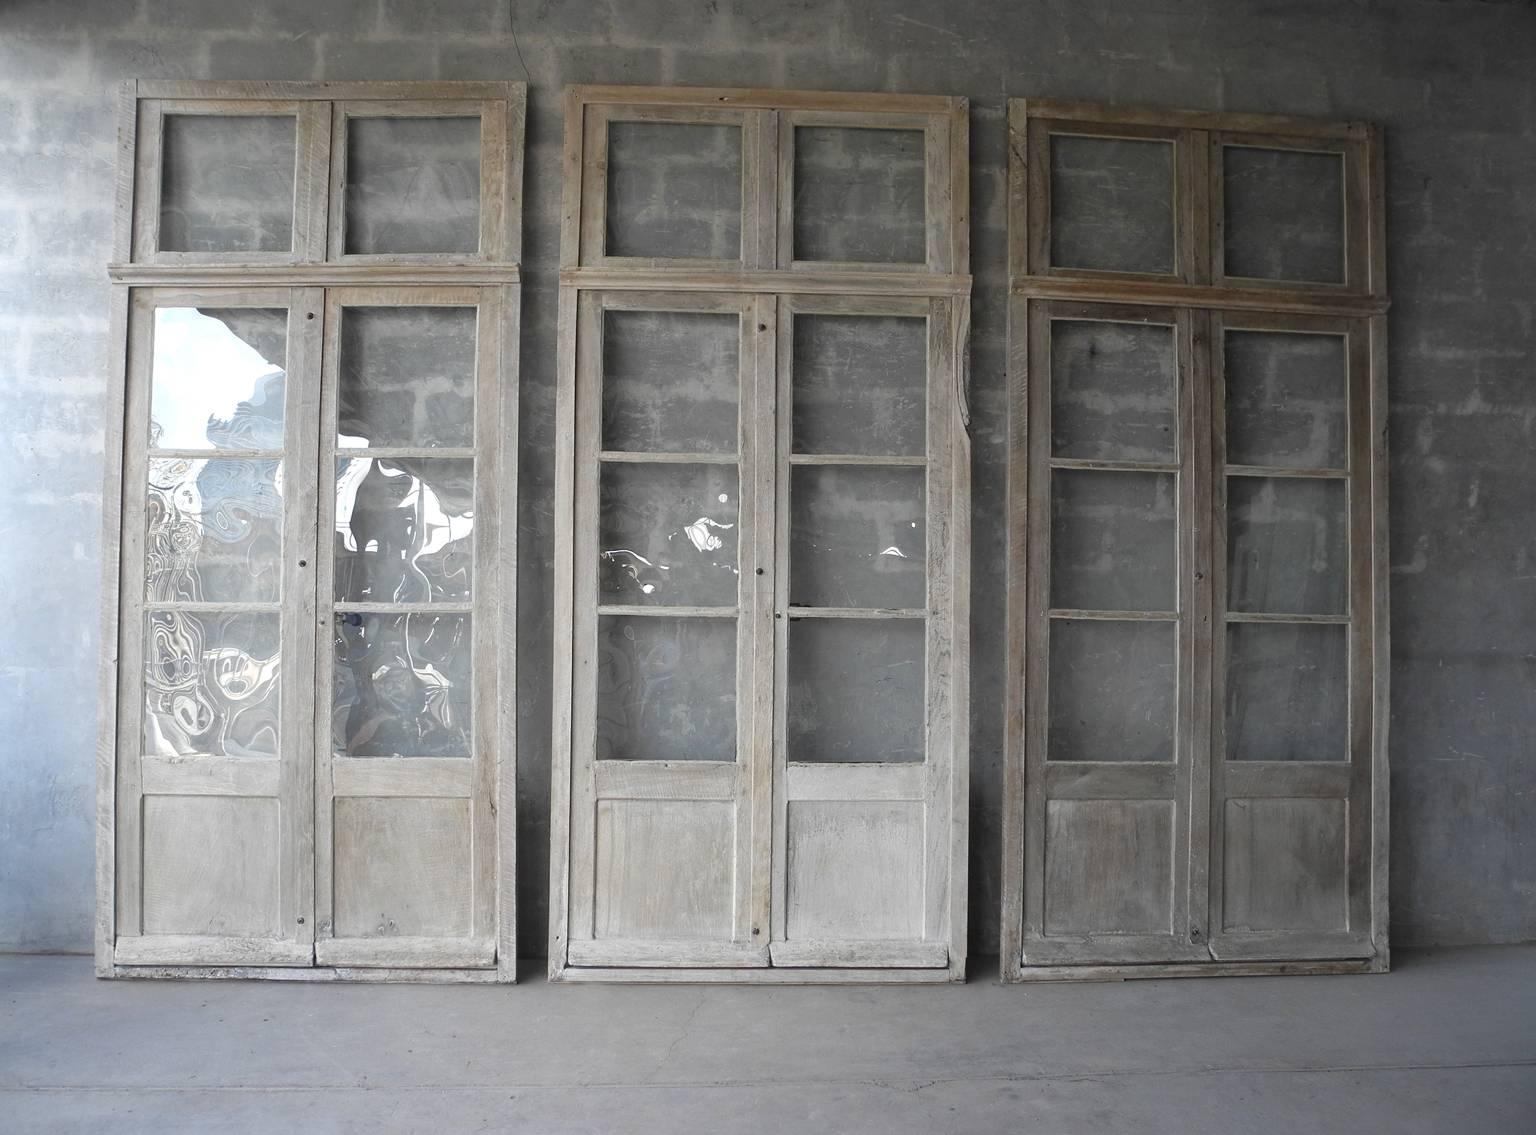 This is a gorgeous group of very large wooden windows from Sisteron. They all include original reclaimed hardware and wood. They have been bleached to give them a natural finish. All glass has been replaced, making them a perfect addition for either